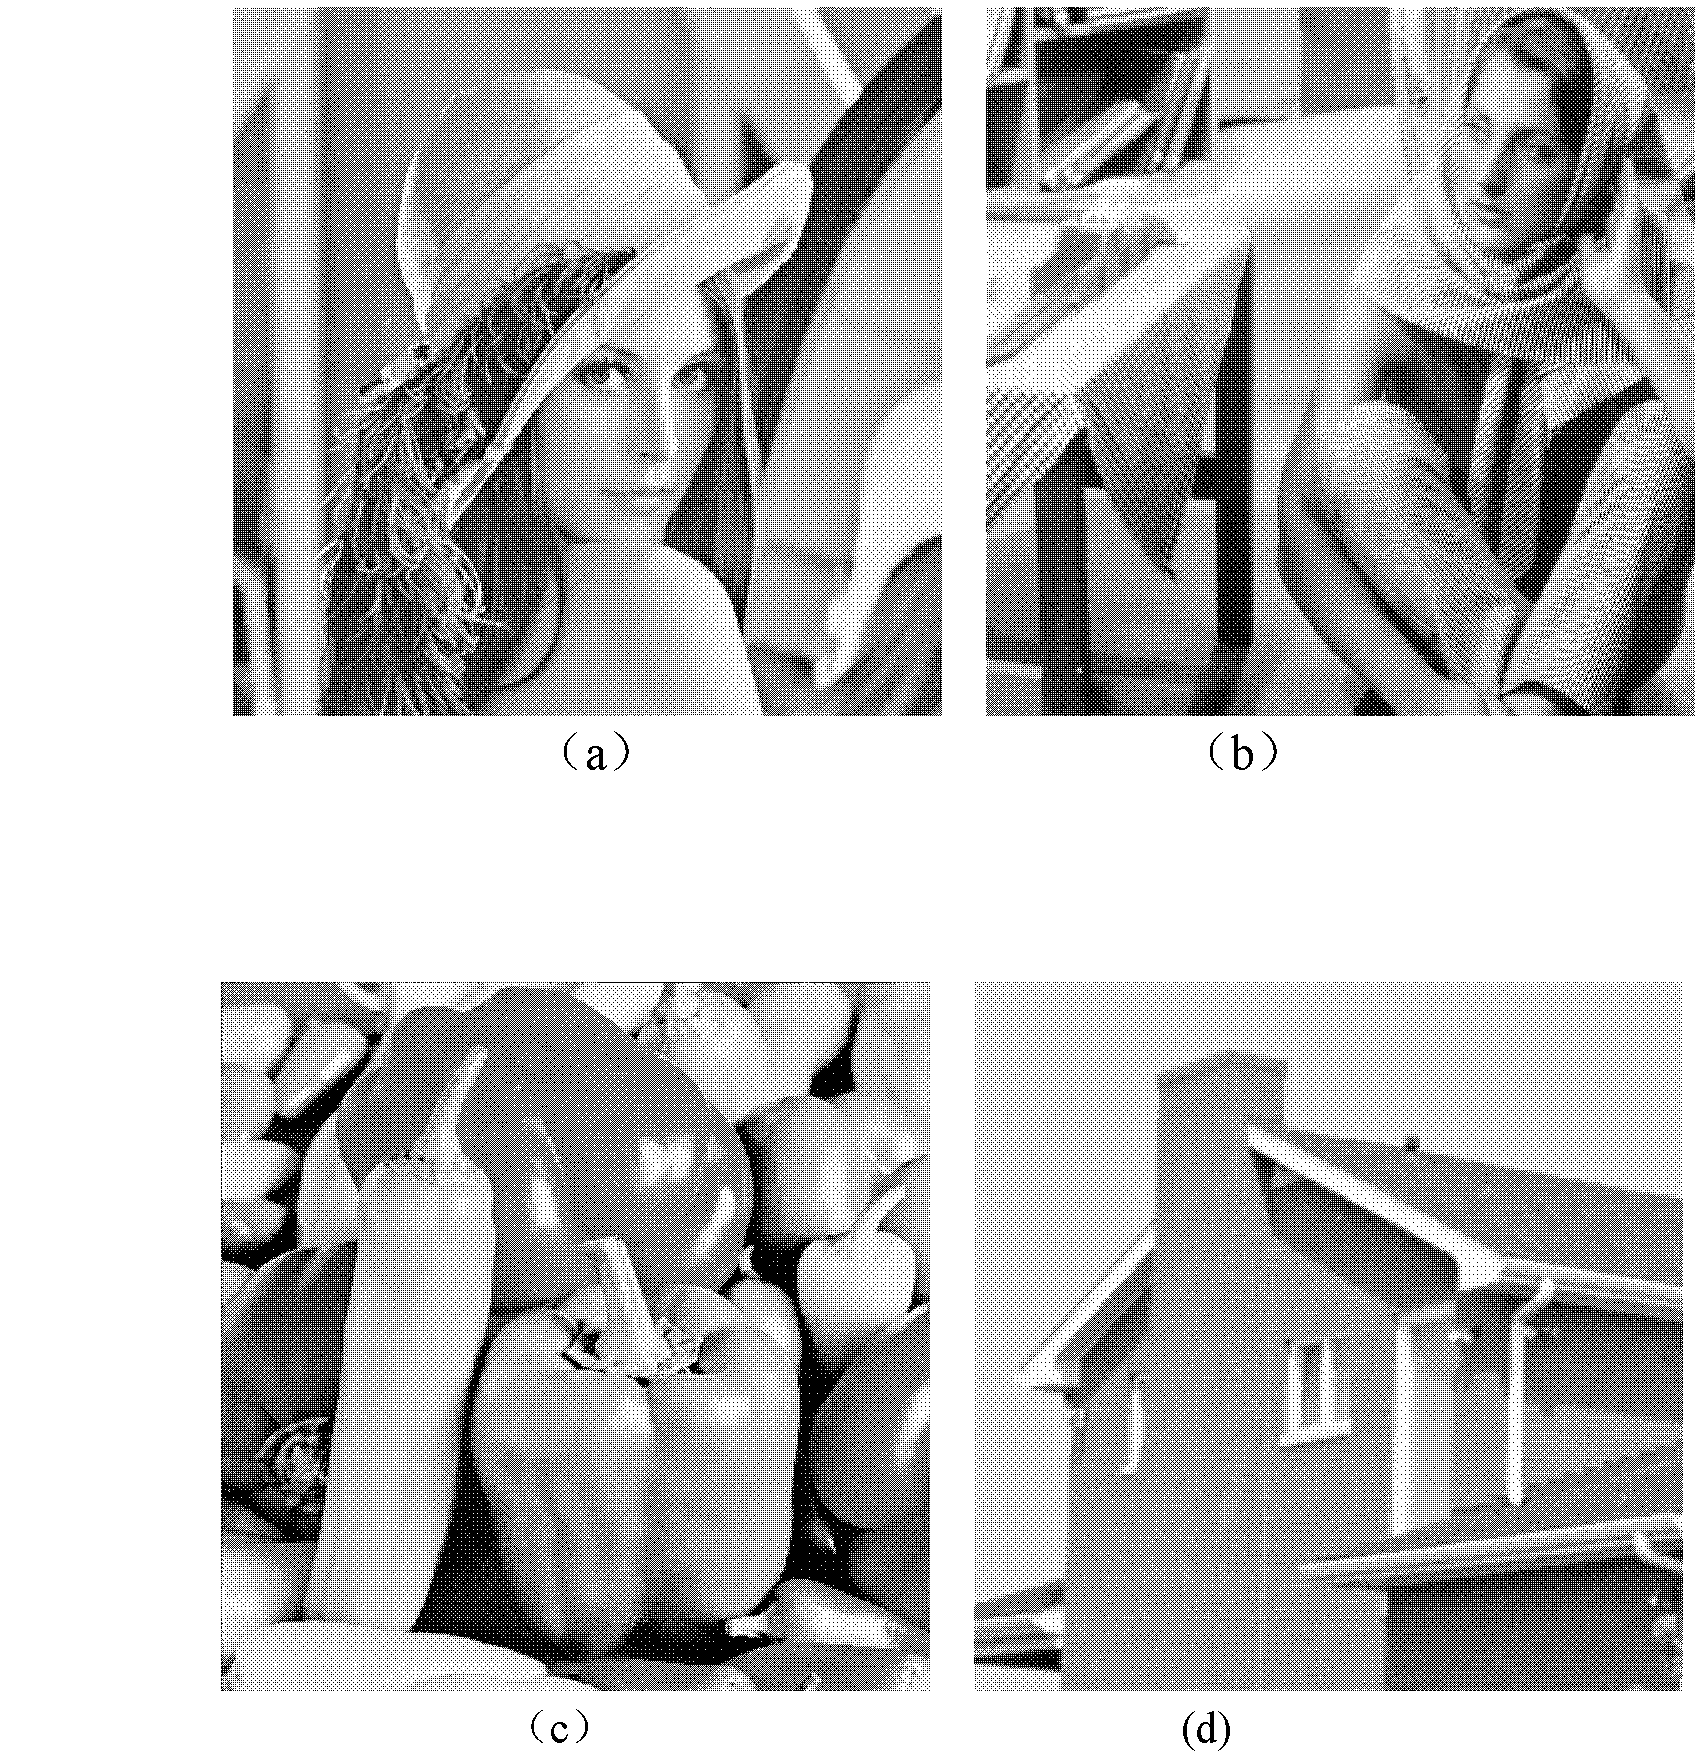 Nonlocal mean denoising method based on joint similarity